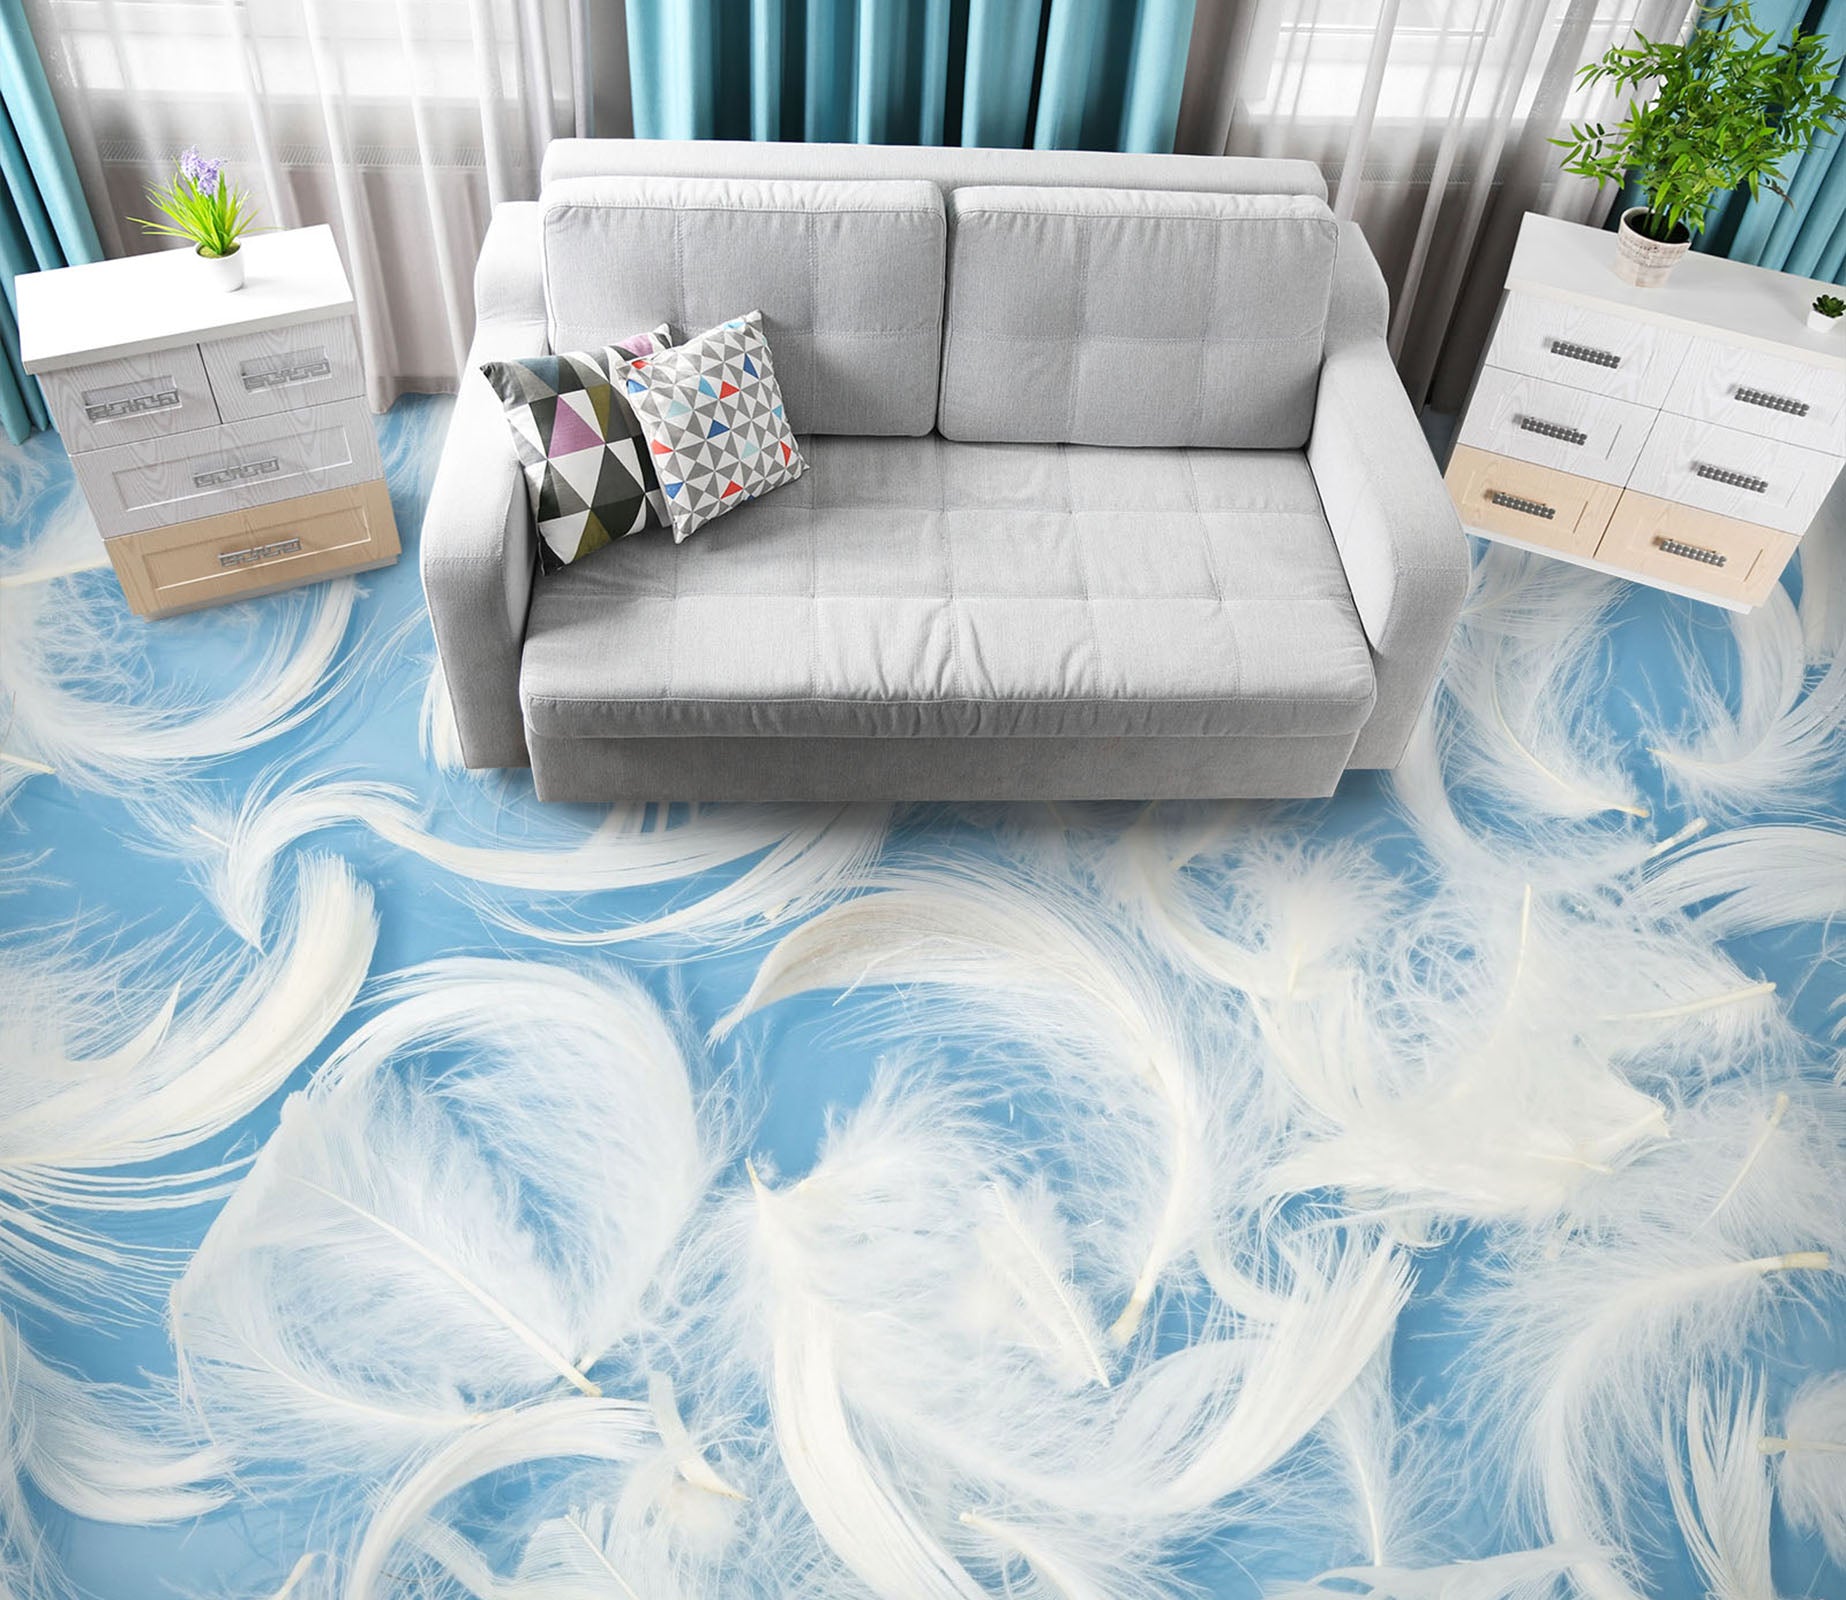 3D Gentle White Feathers 1393 Floor Mural  Wallpaper Murals Self-Adhesive Removable Print Epoxy